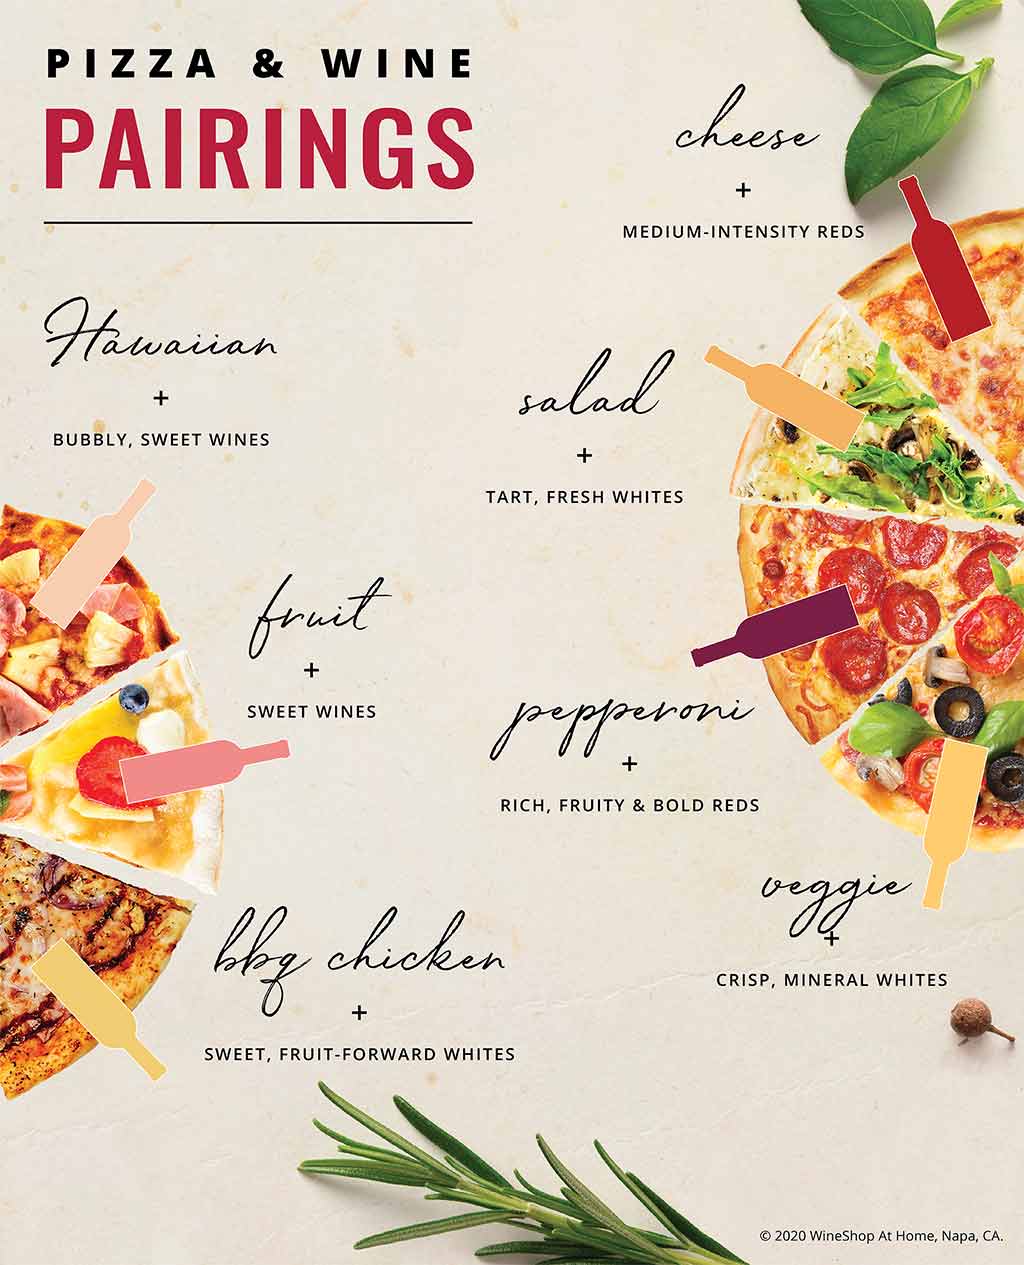 Pizza and wine pairings